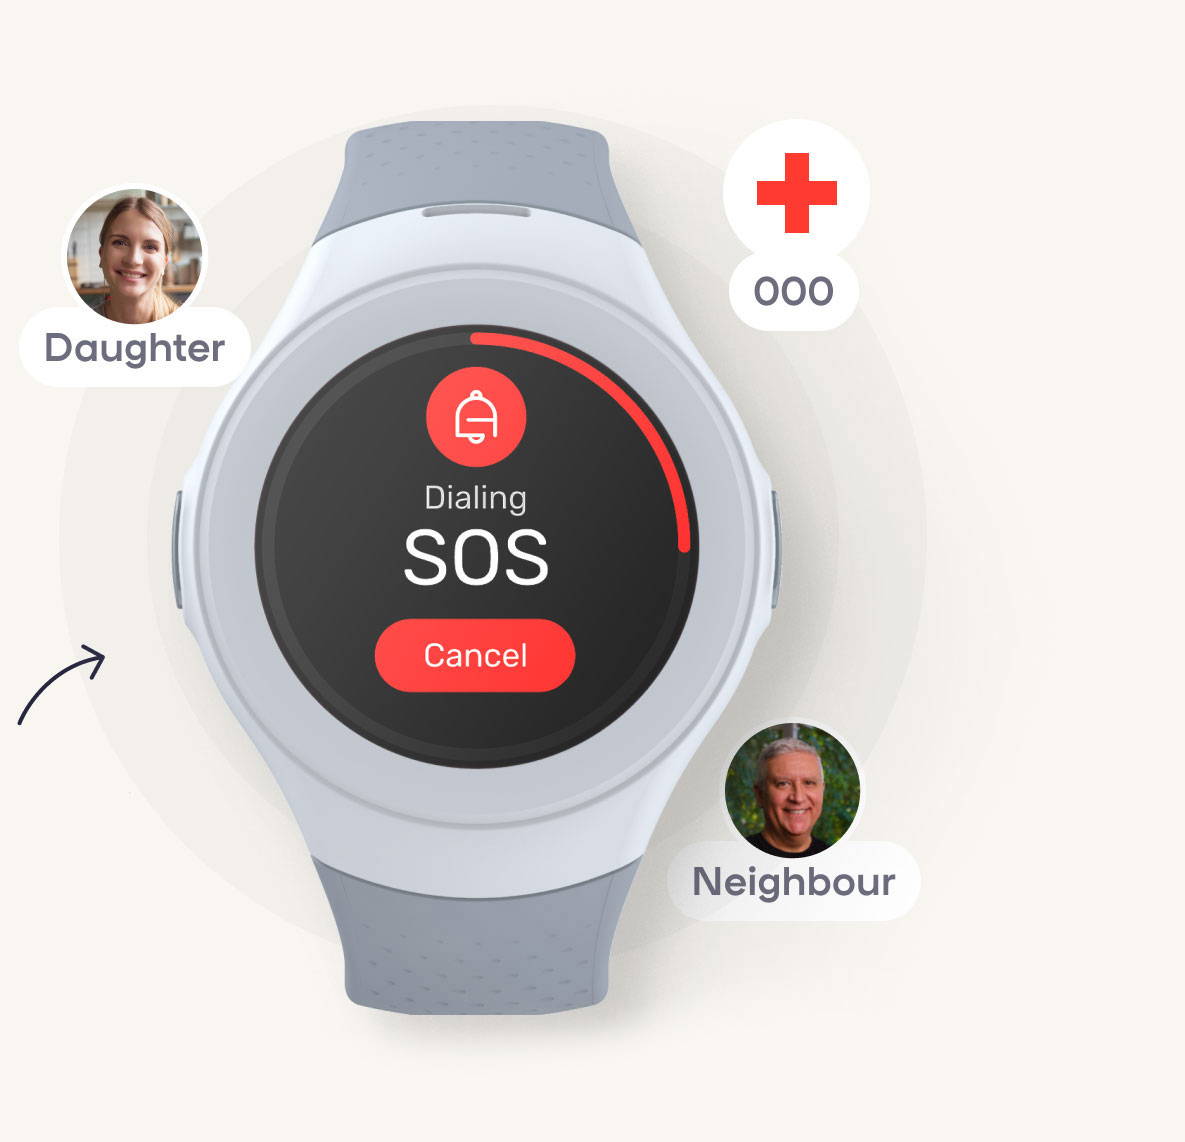 Whether it's your neighbour or family members, you can set as many emergency contacts on the gps tracking watches.